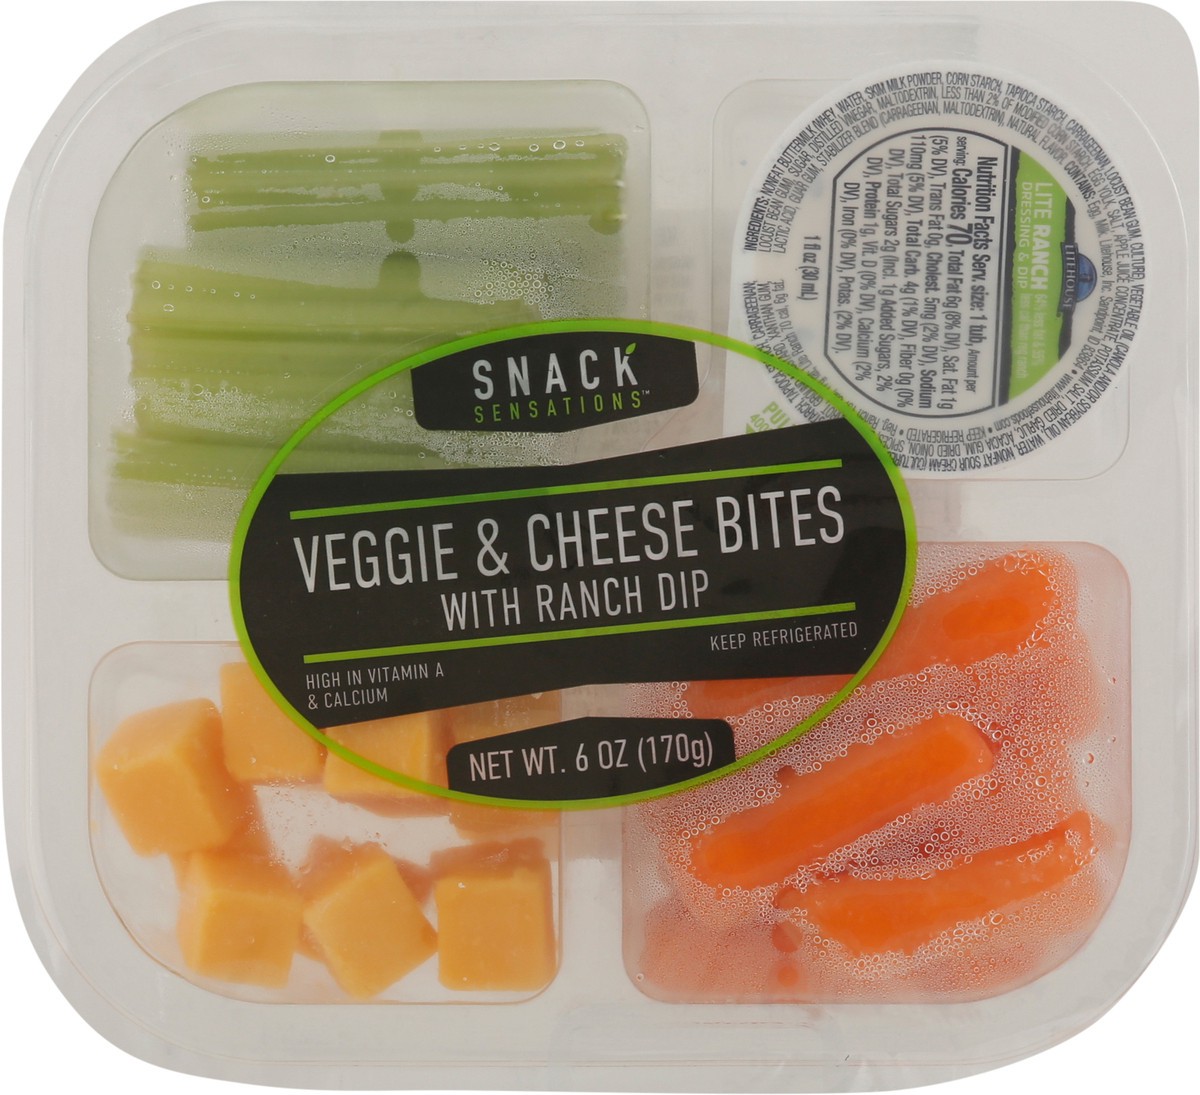 slide 9 of 11, Snack Sensations with Ranch Dip Veggie & Cheese Bites with Ranch Dip 6 oz, 6 oz